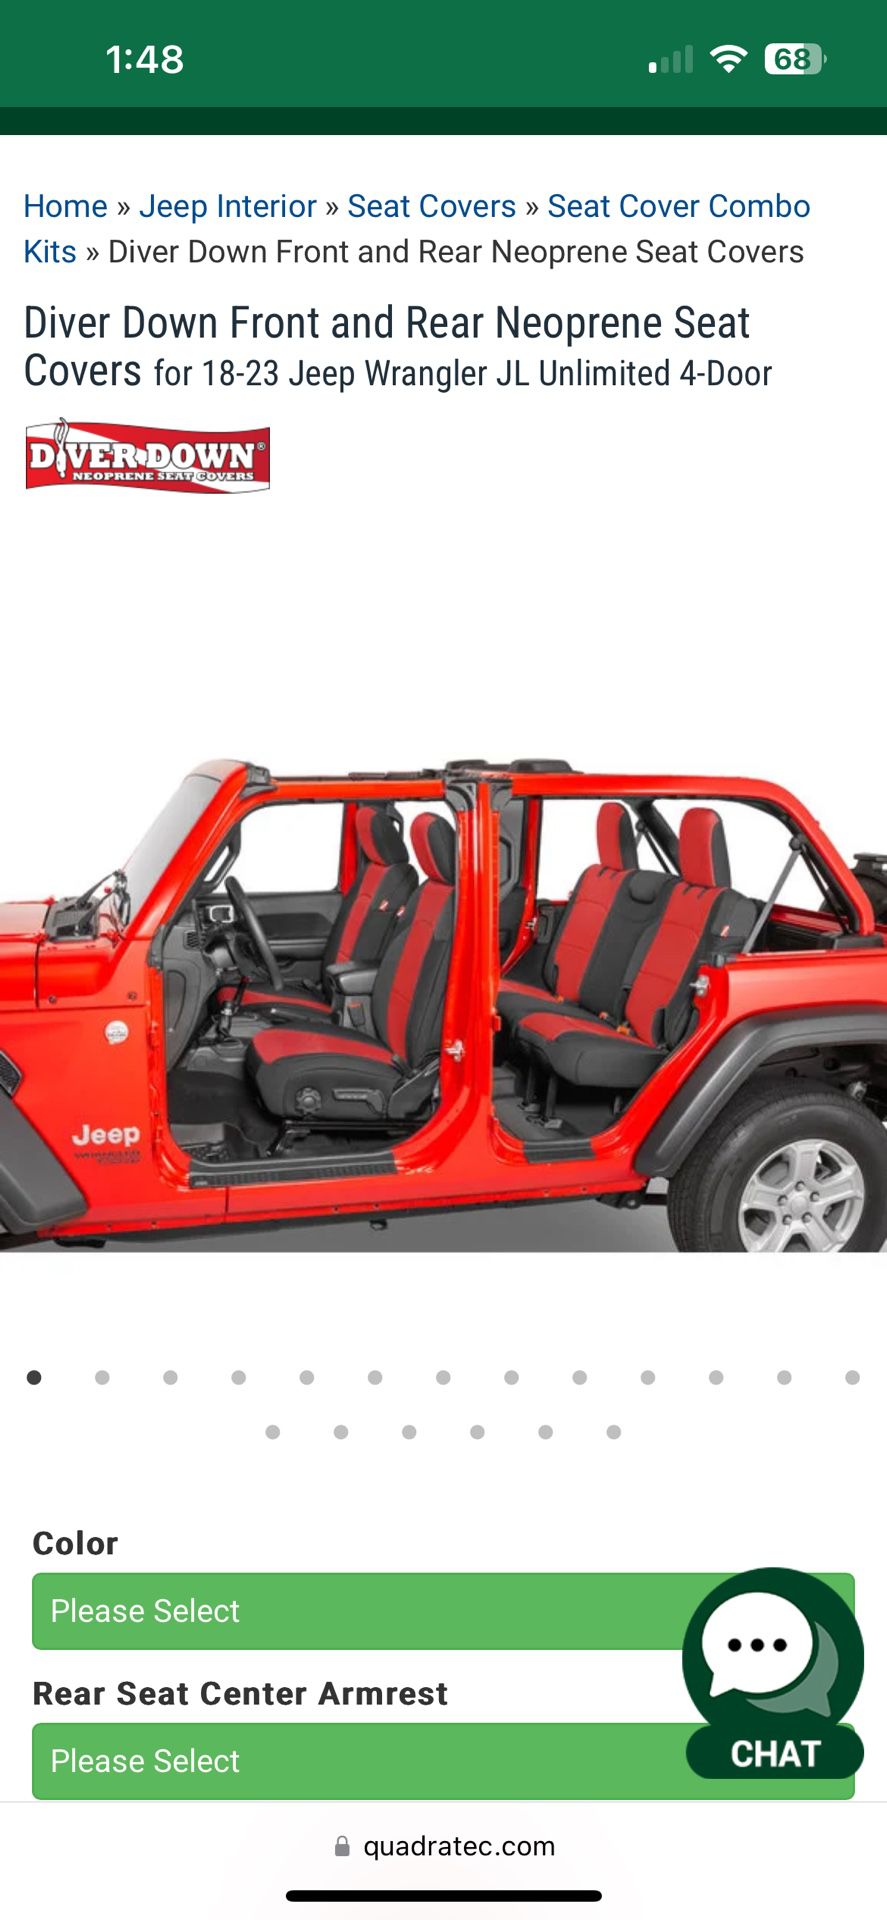 Diver Down Front and Rear Neoprene Seat Covers for 18-23 Jeep